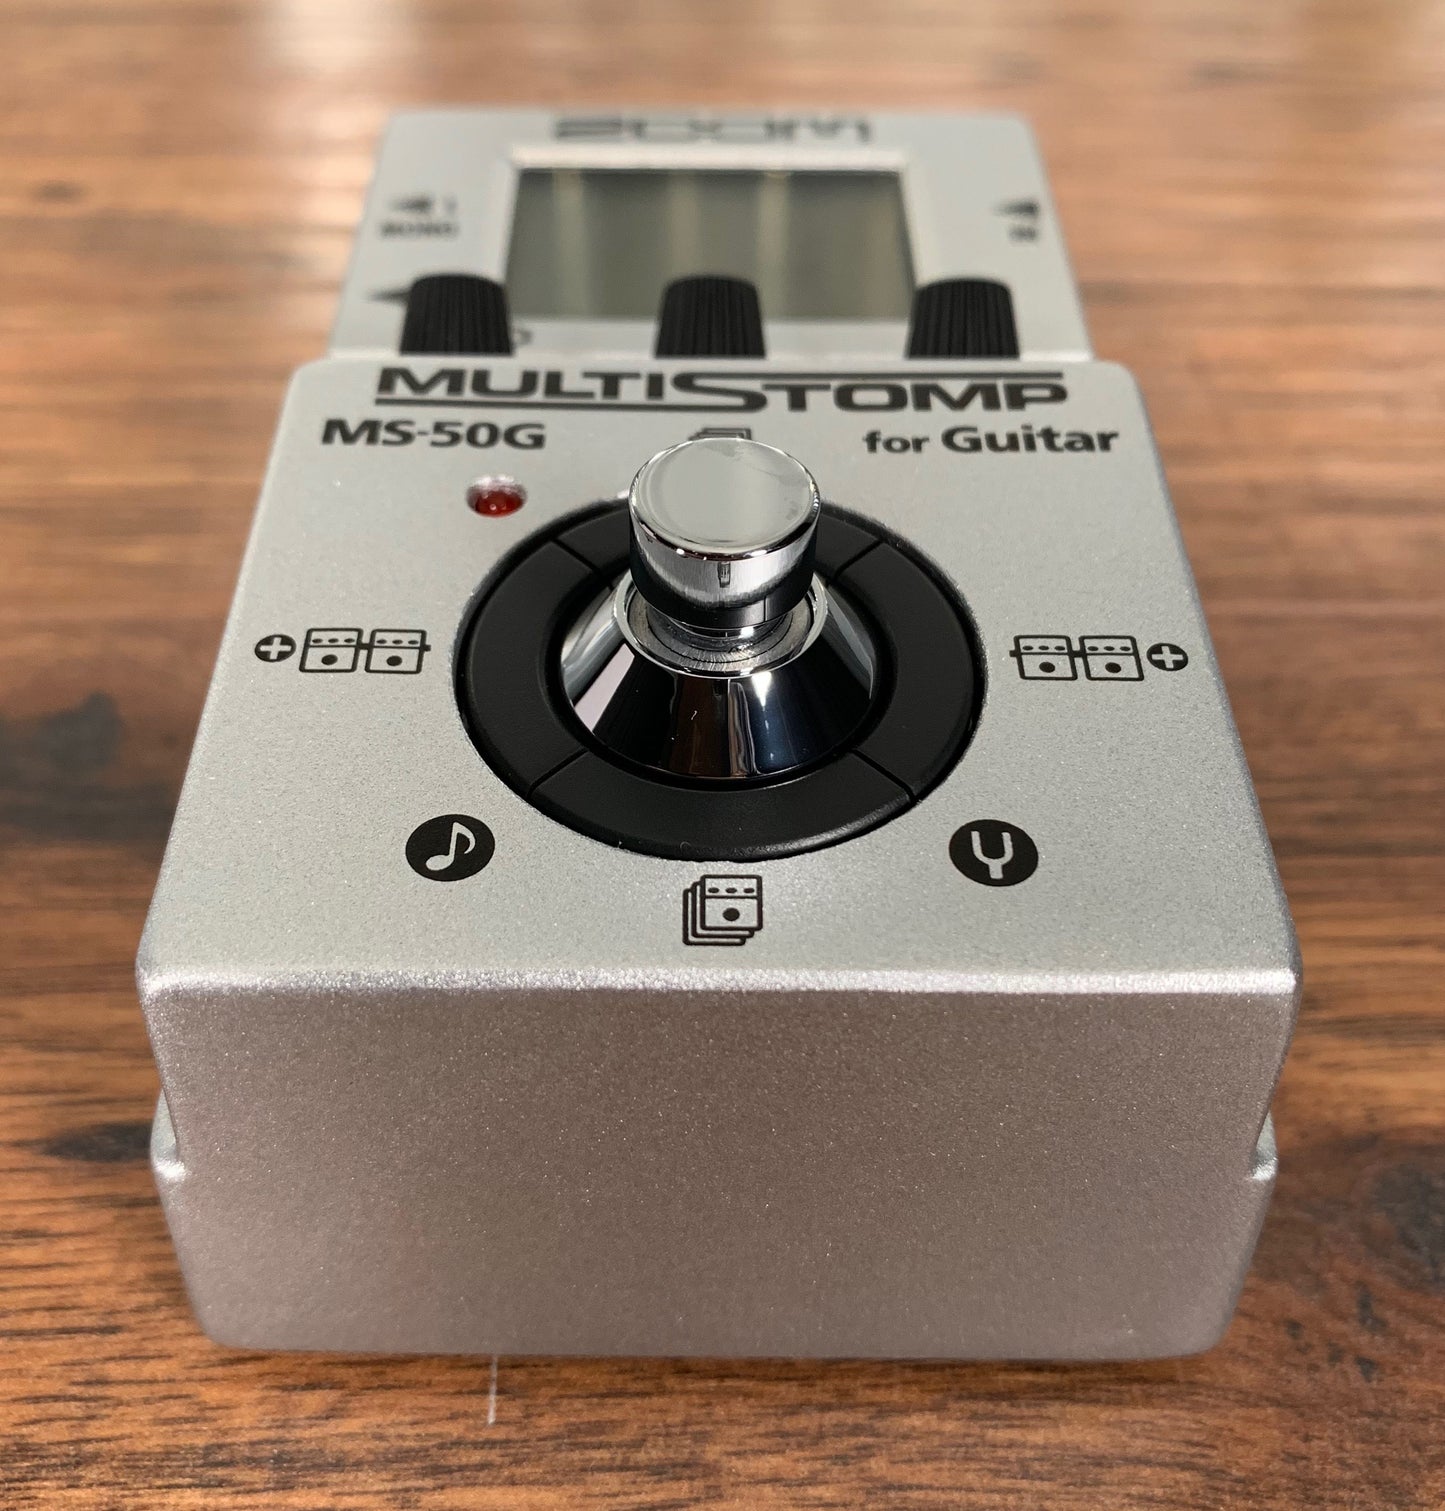 Zoom MS-50G MulitStomp Programmable Guitar Effect Pedal